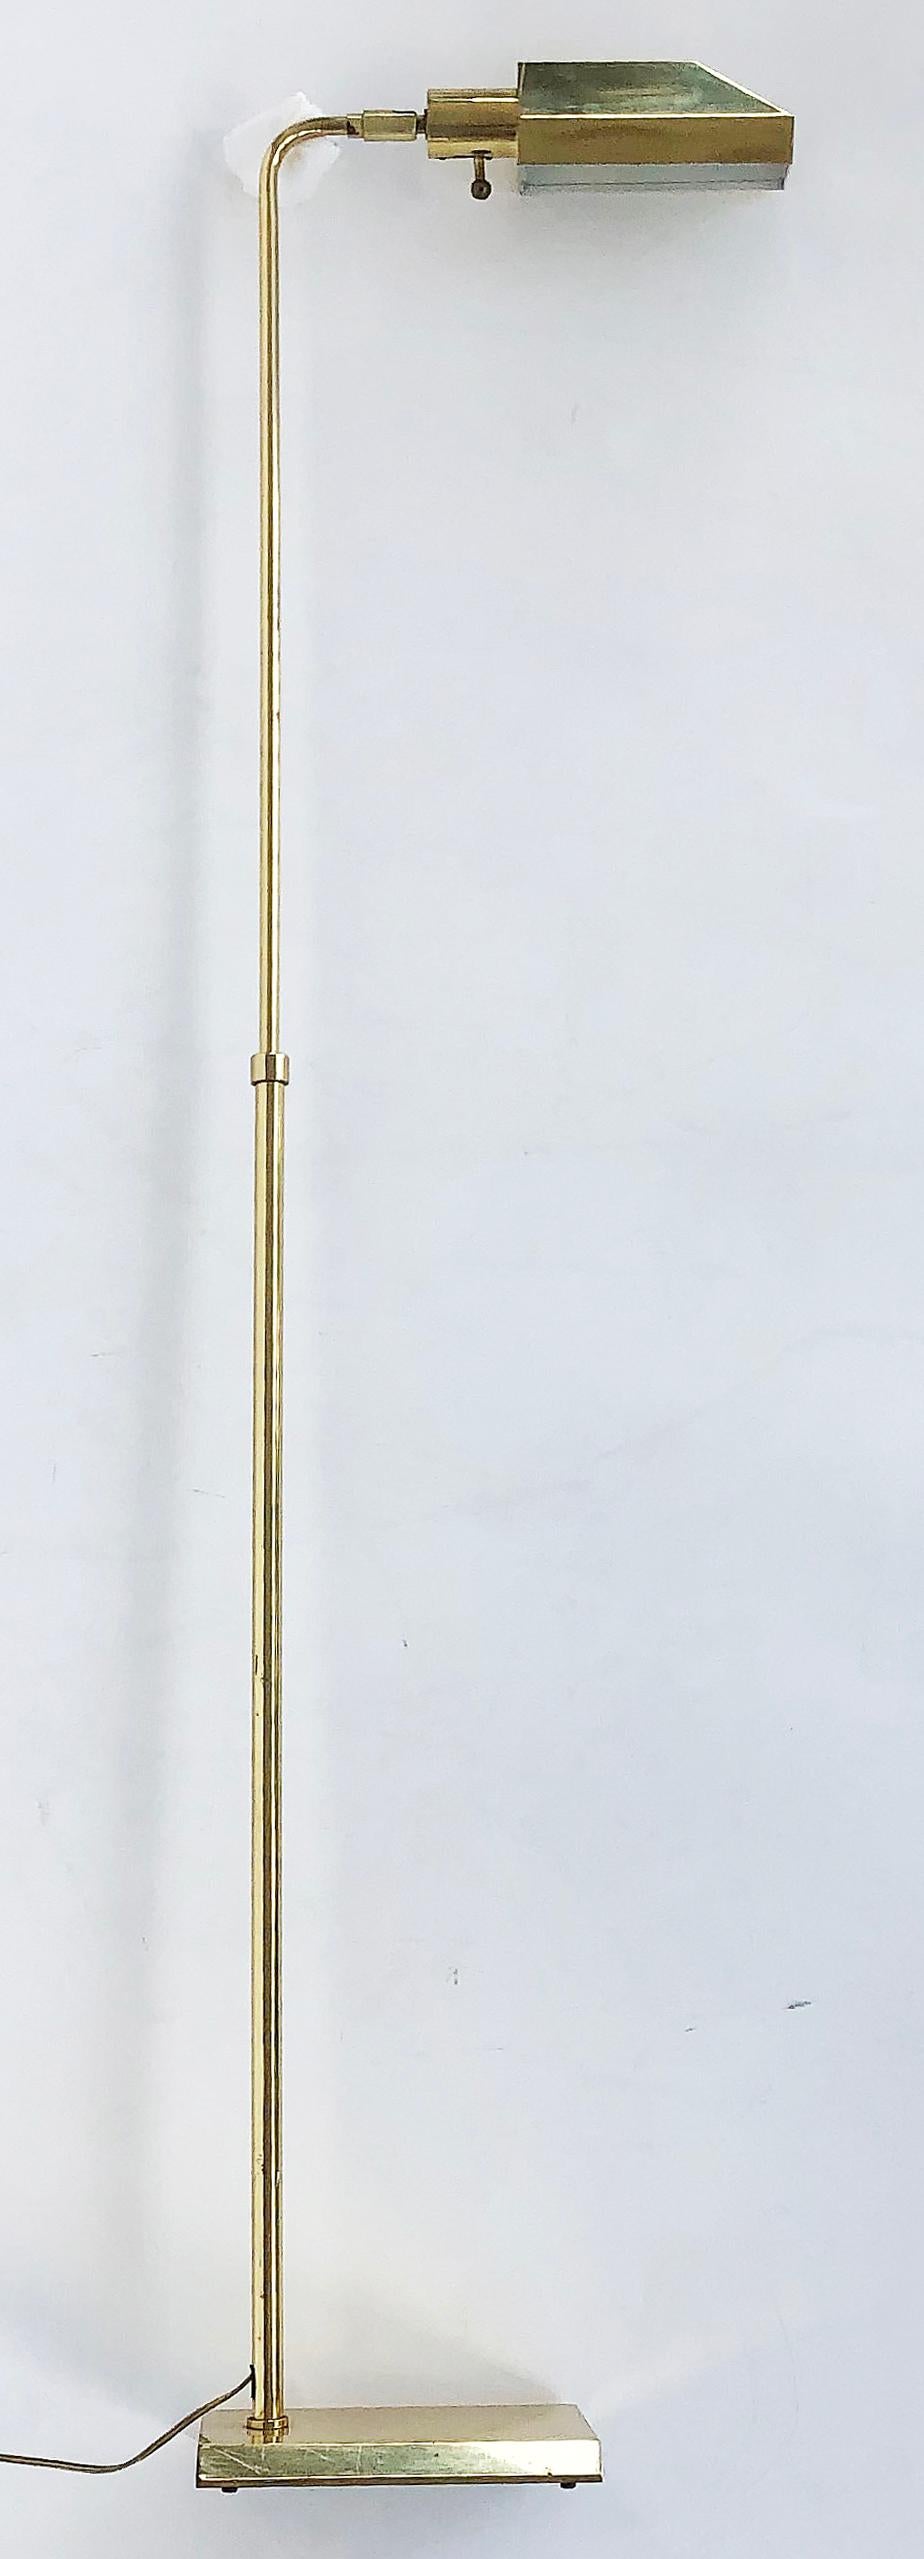 1980s Vintage Brass Plated Adjustable Height Floor Lamp, Pivoting Light

Offered for sale is a vintage modern brass plated floor lamp that has a pivoting head and is adjustable in height.  

Base 9